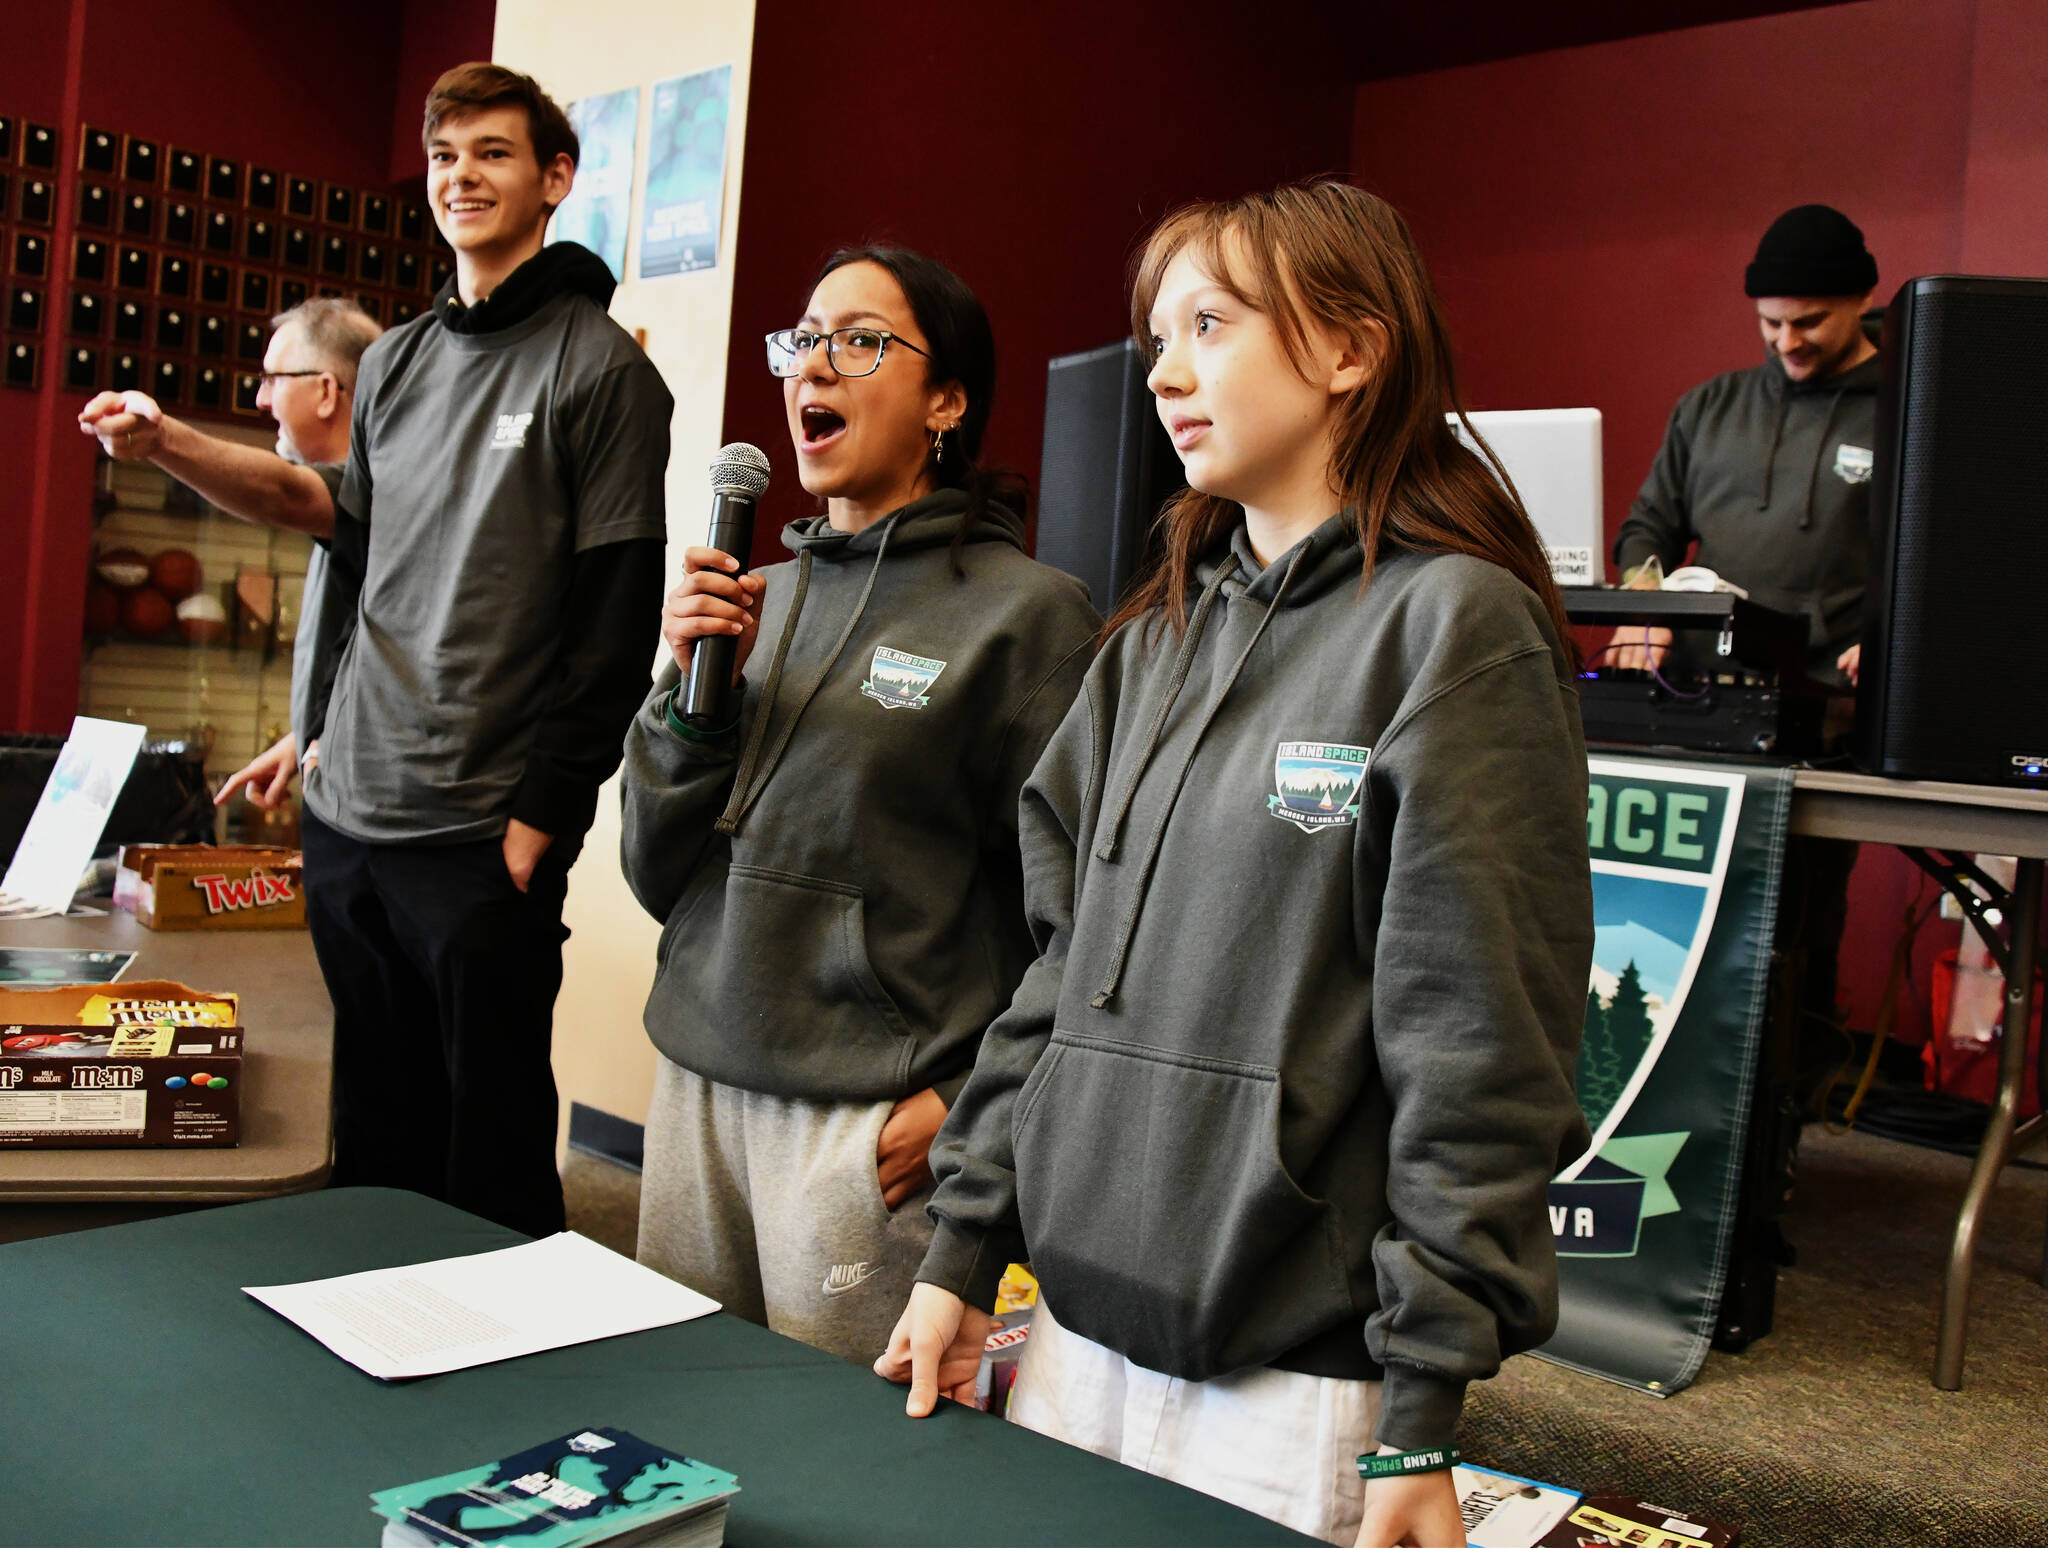 From left to right, Mercer Island Youth and Family Services school-based counselor Chris Harnish, Mercer Island High School sophomore Connor Wood, senior Libby Myers and sophomore Ren Evans and DJ Clint Kuper at the Island Space Lunch Jam on April 19 in the school commons. Andy Nystrom/ staff photo